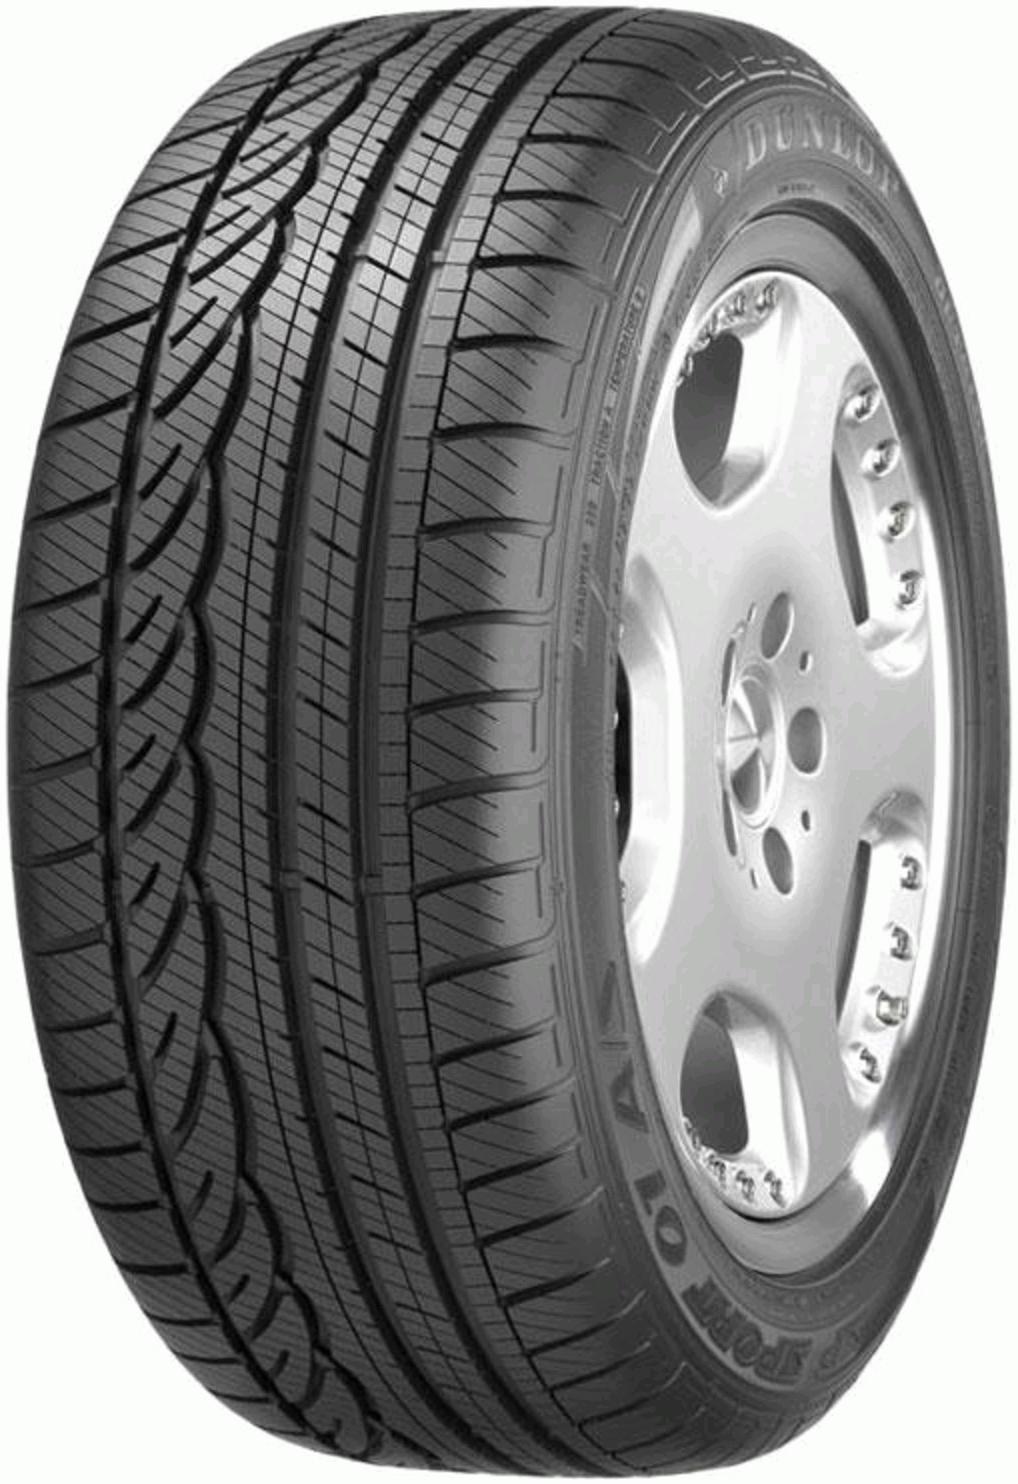 Dunlop SP Sport and Tests 01 Reviews AS - Tyre